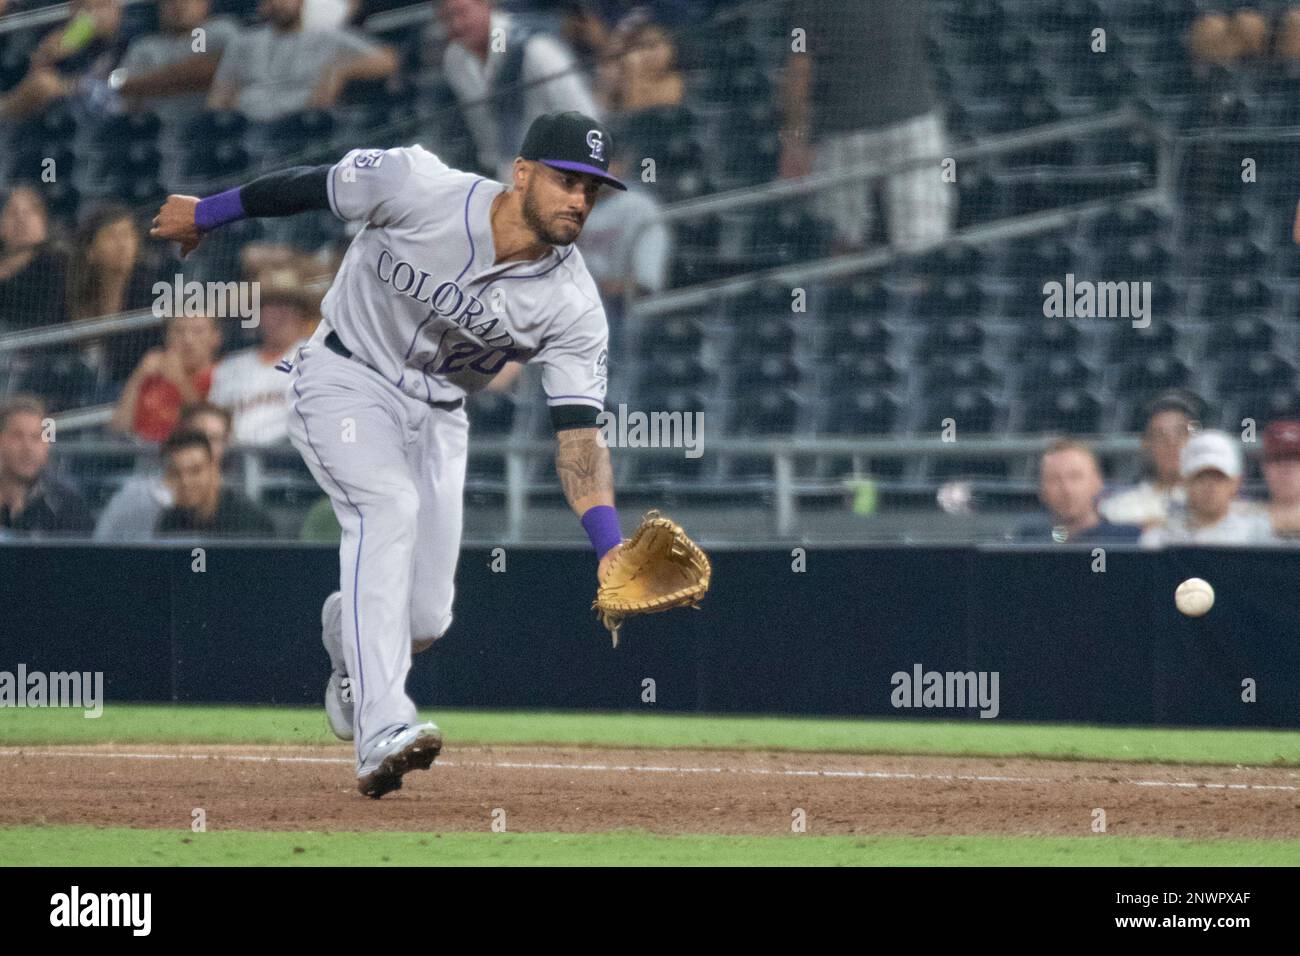 Why the Rockies are standing by Ian Desmond (for now)